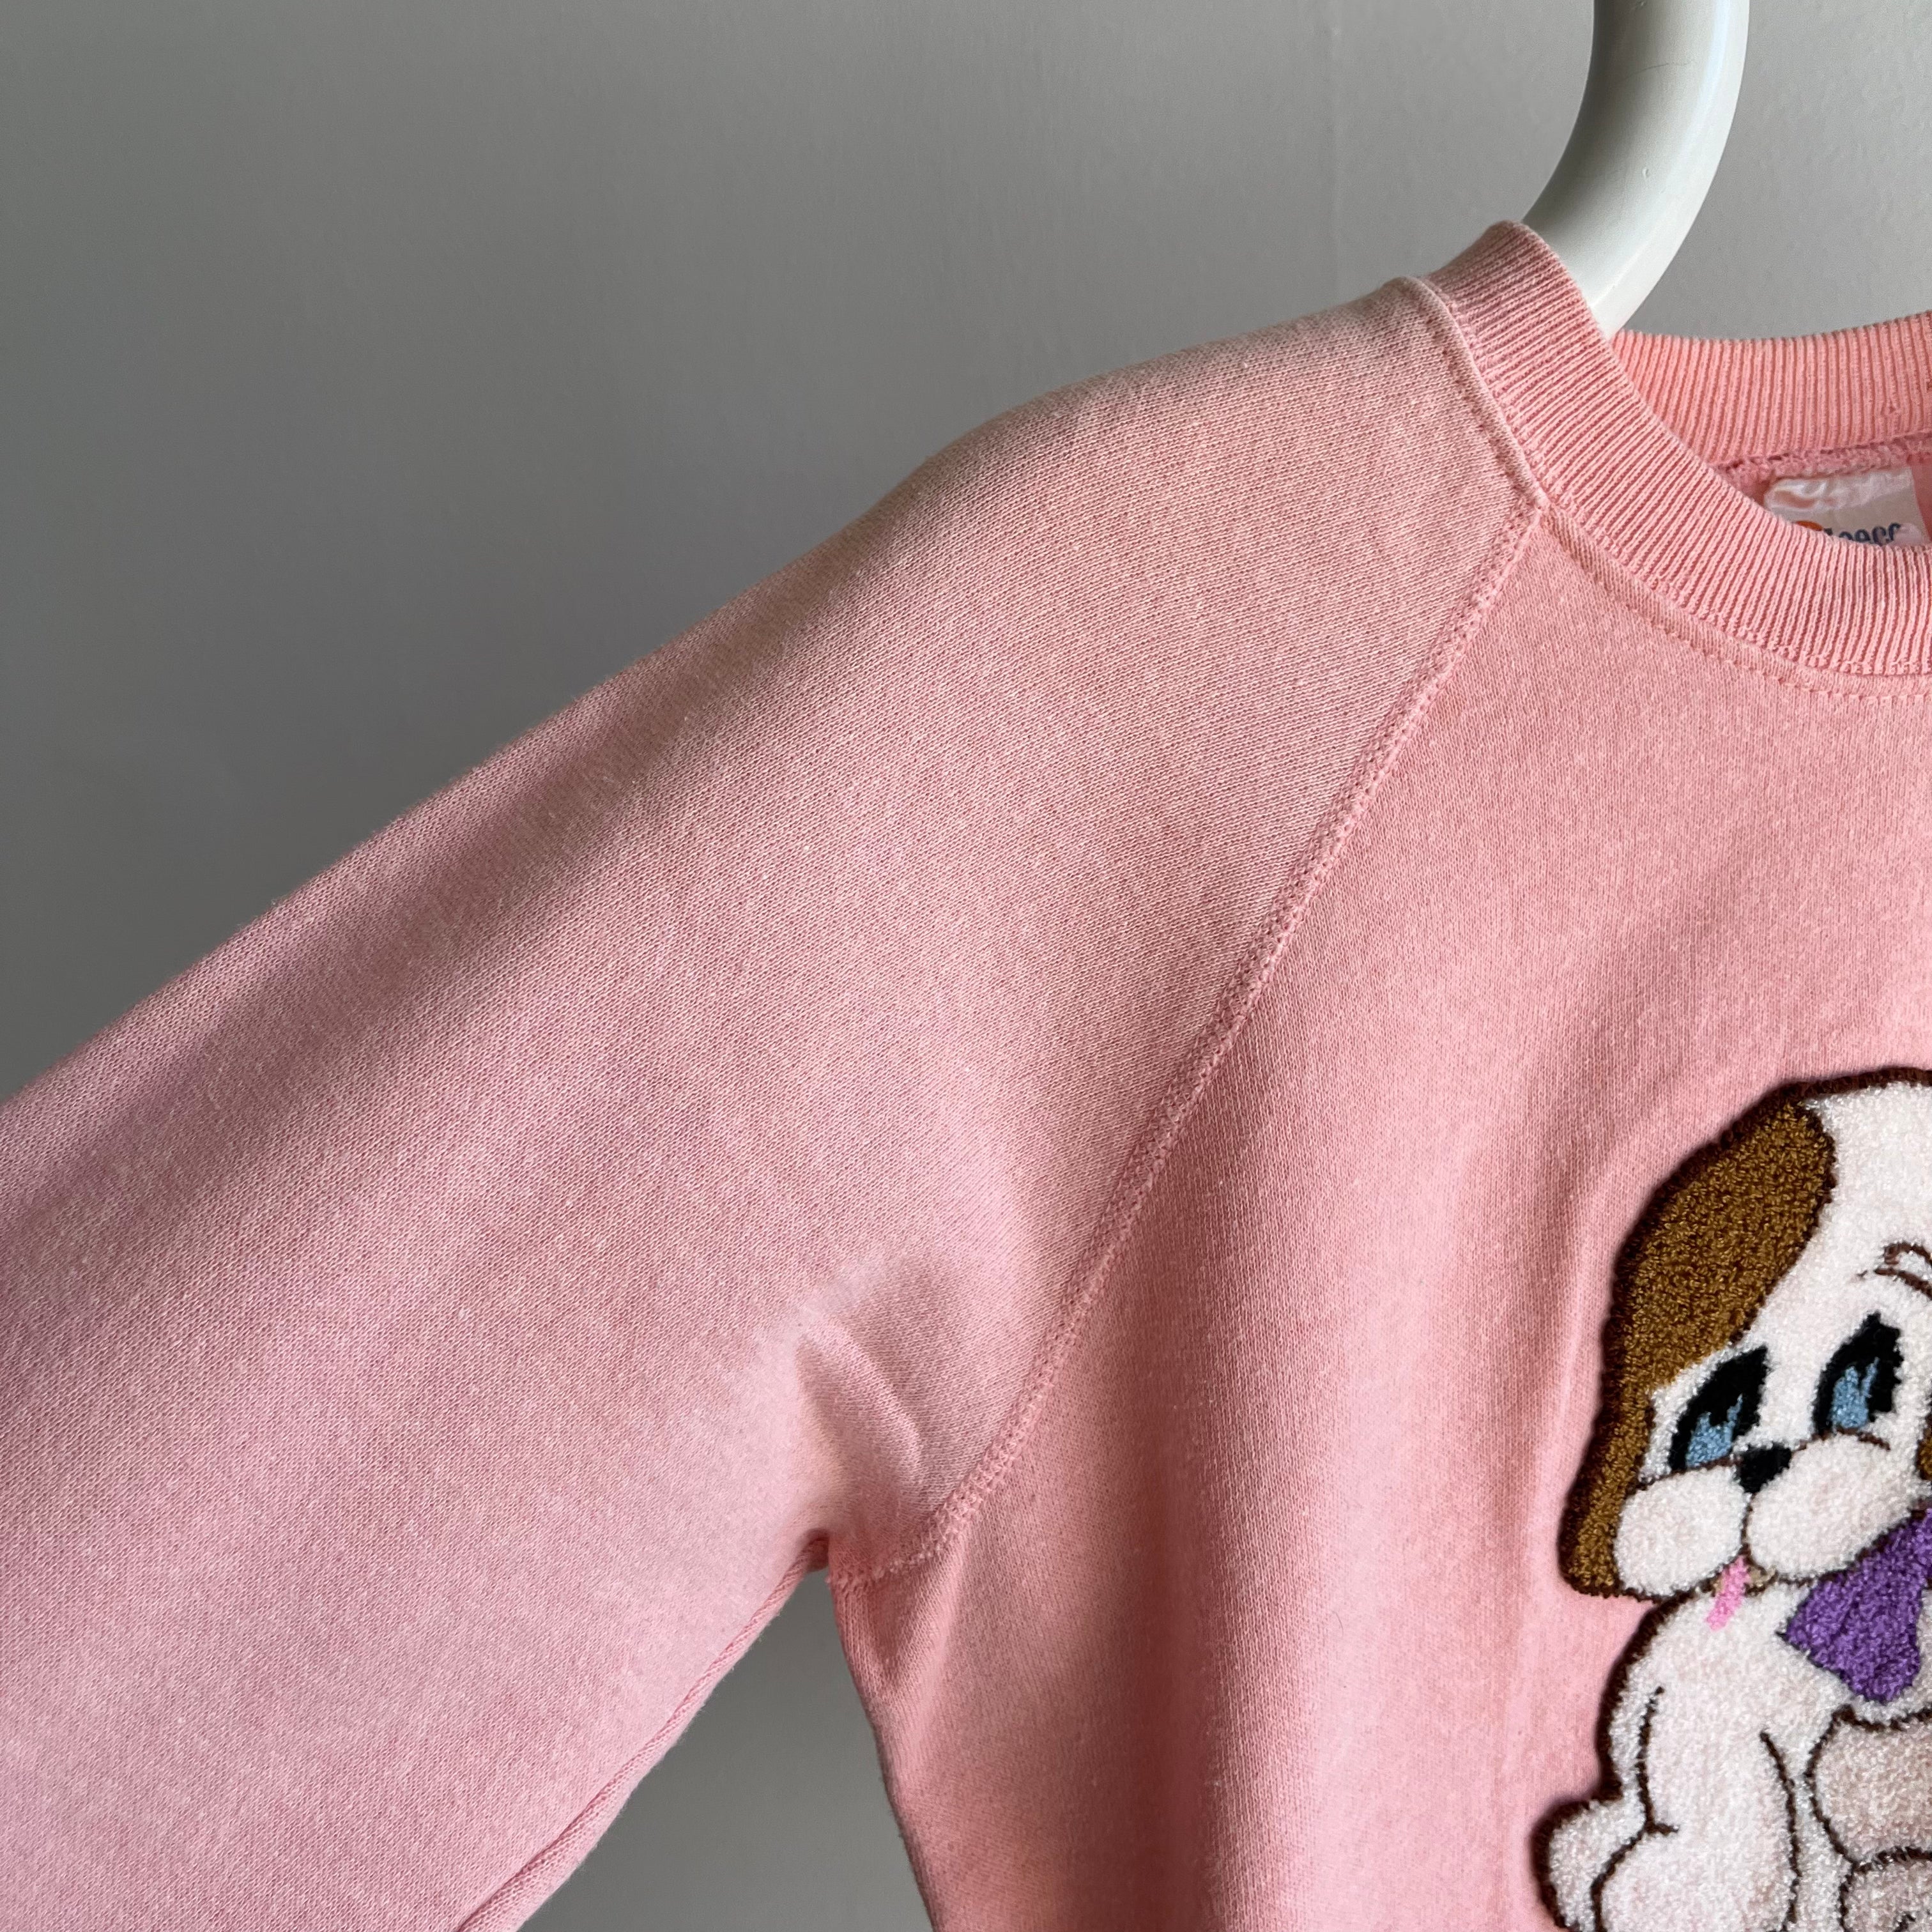 1970s Puppy Sweatshirt That Will Stop People In Their Tracks